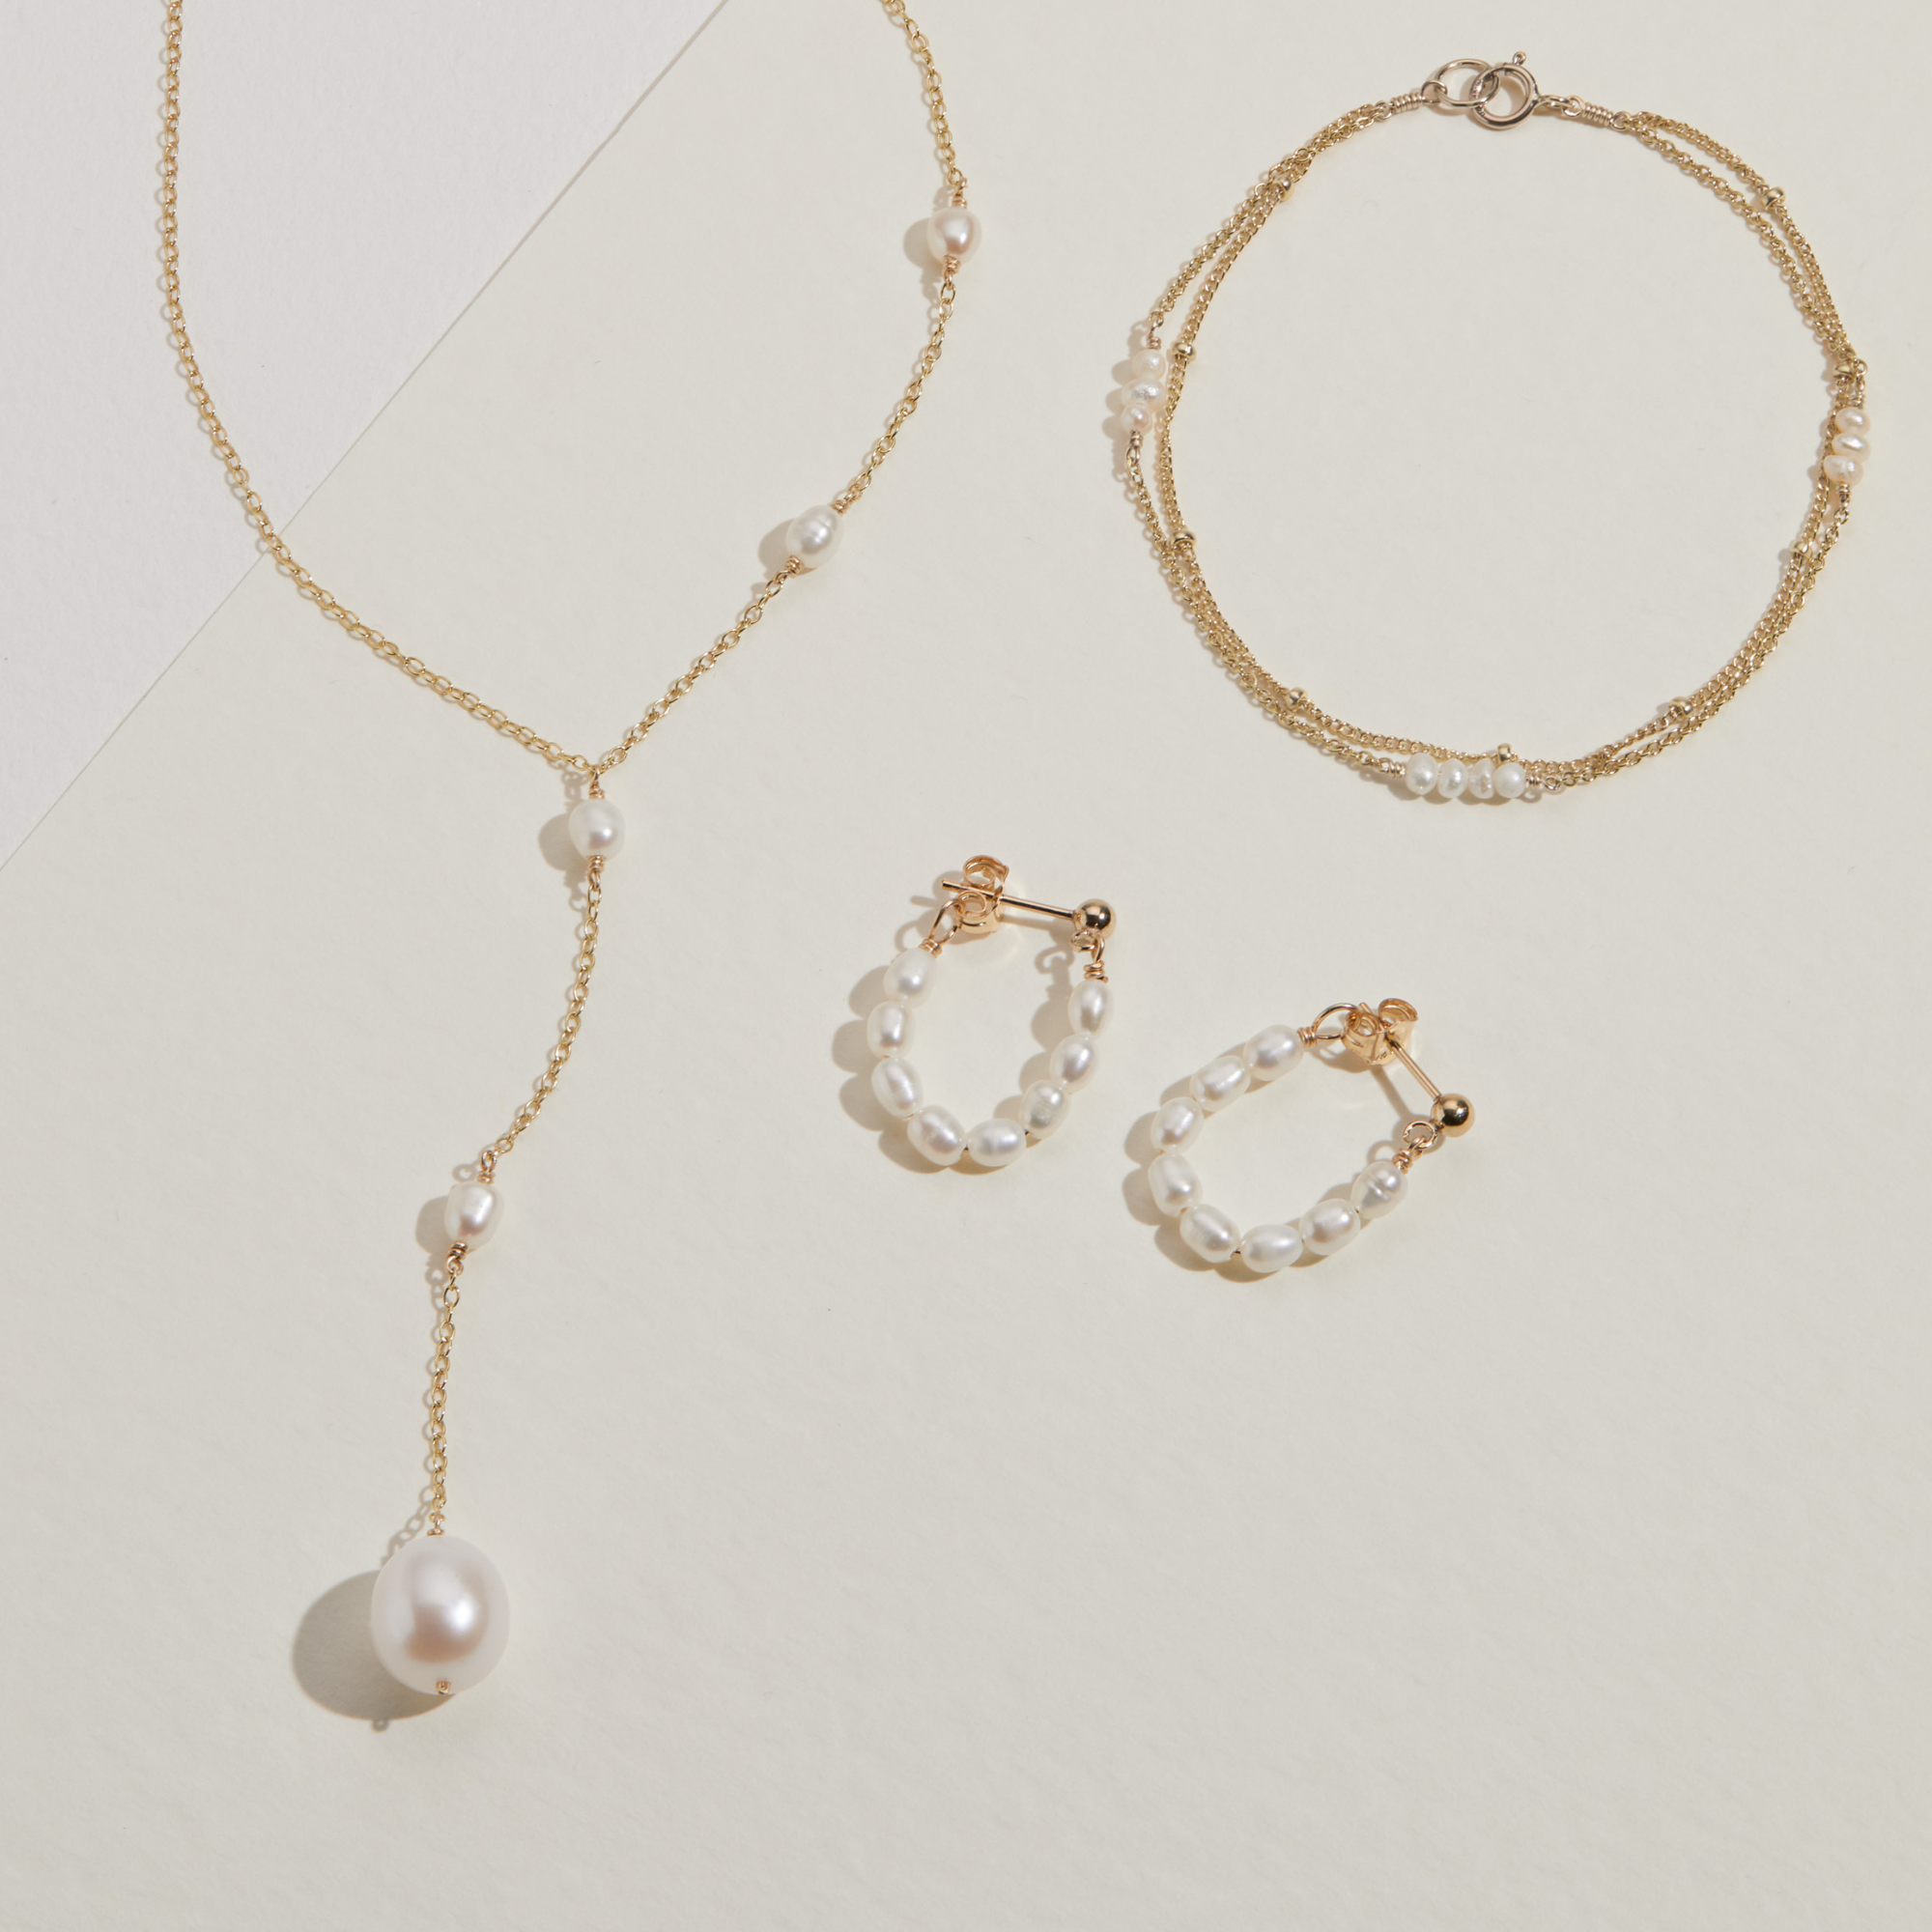 Gold seed pearl hoop earrings, a gold cluster bracelet and a gold seed pearl lariat necklace on a paper surface